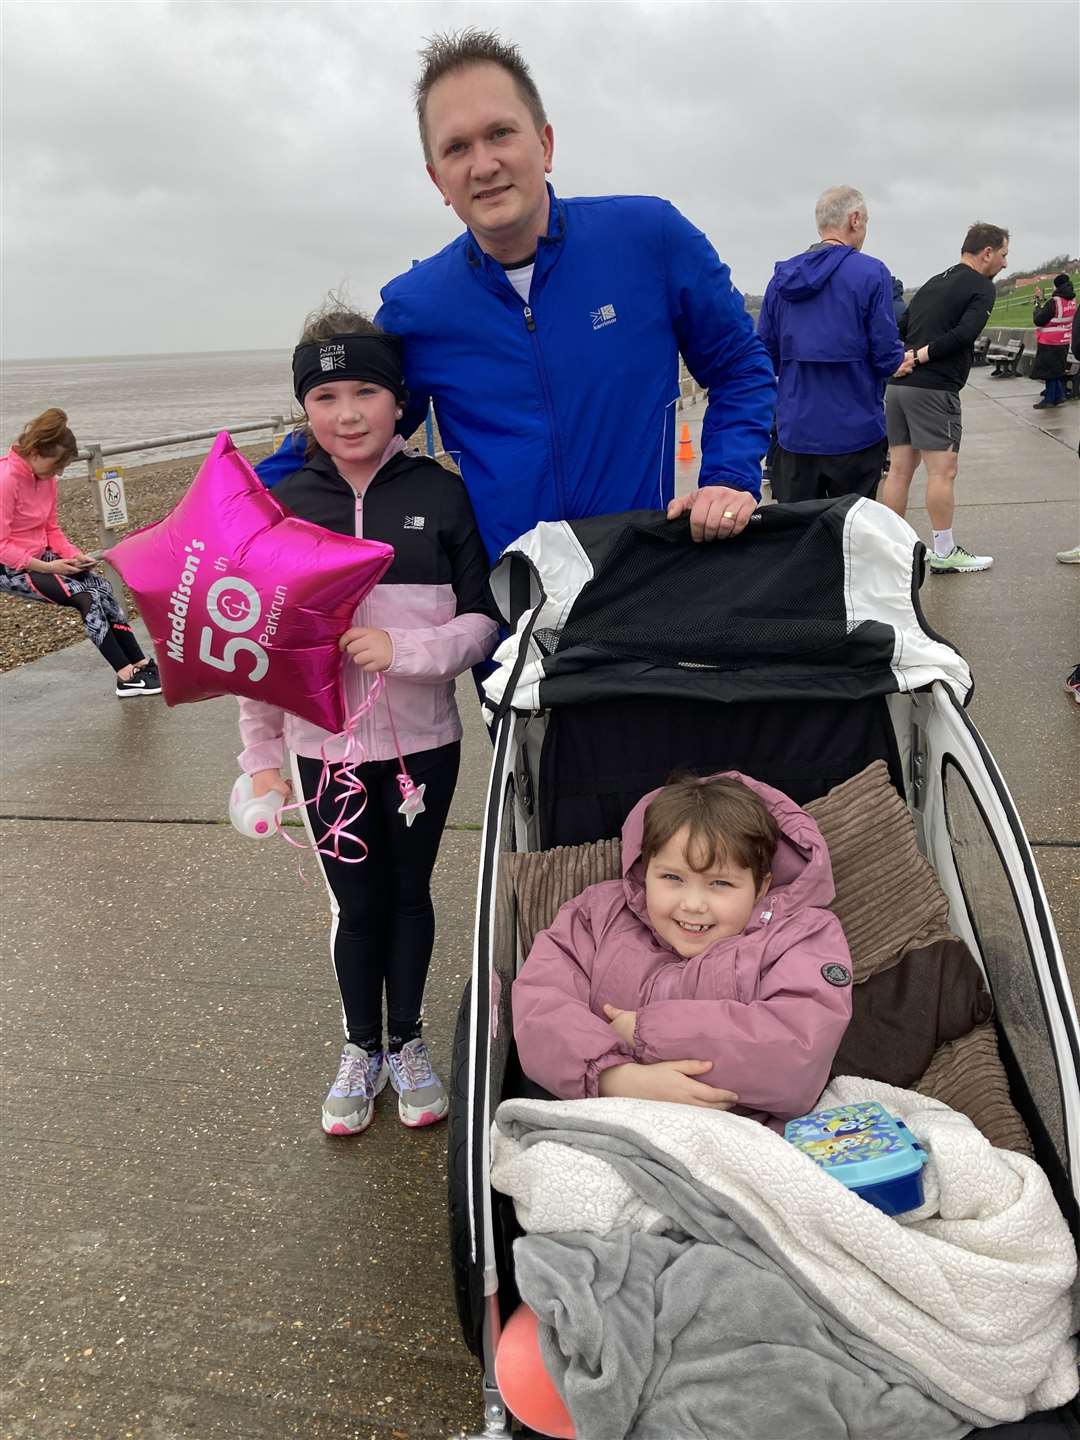 Maddison Townsend-Brazier, 10, was the youngest runner when Sheppey's 5k parkrun at The Leas at Minster celebrated its 100th anniversary on Saturday. She is pictured with her dad Tim and her sister Mollie